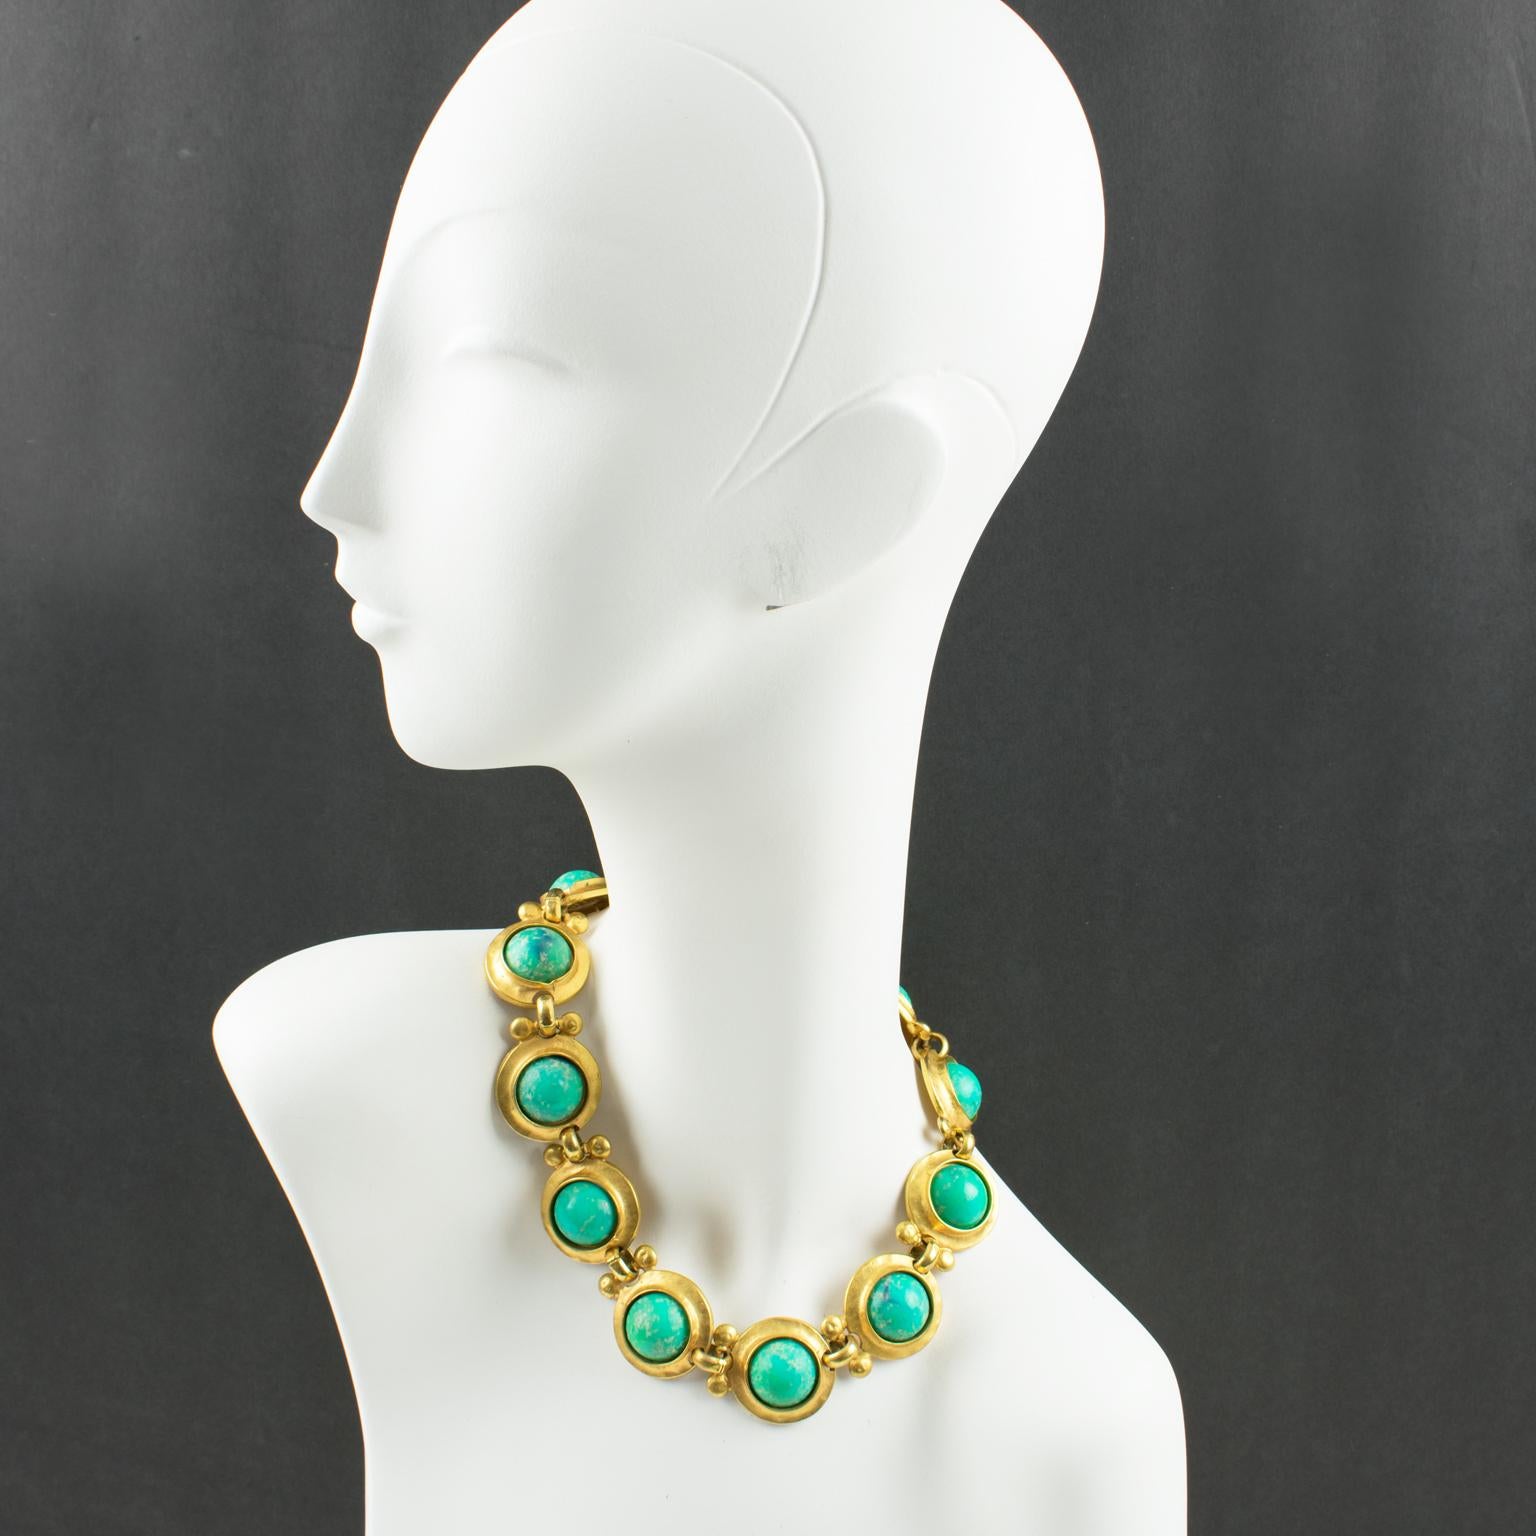 Stunning Edouard Rambaud Paris choker necklace. Dimensional link medallion design featuring gilt metal framing with mat finish aspect, topped with turquoise-like resin cabochon. Signed at the back of each element by this well-known French Designer.